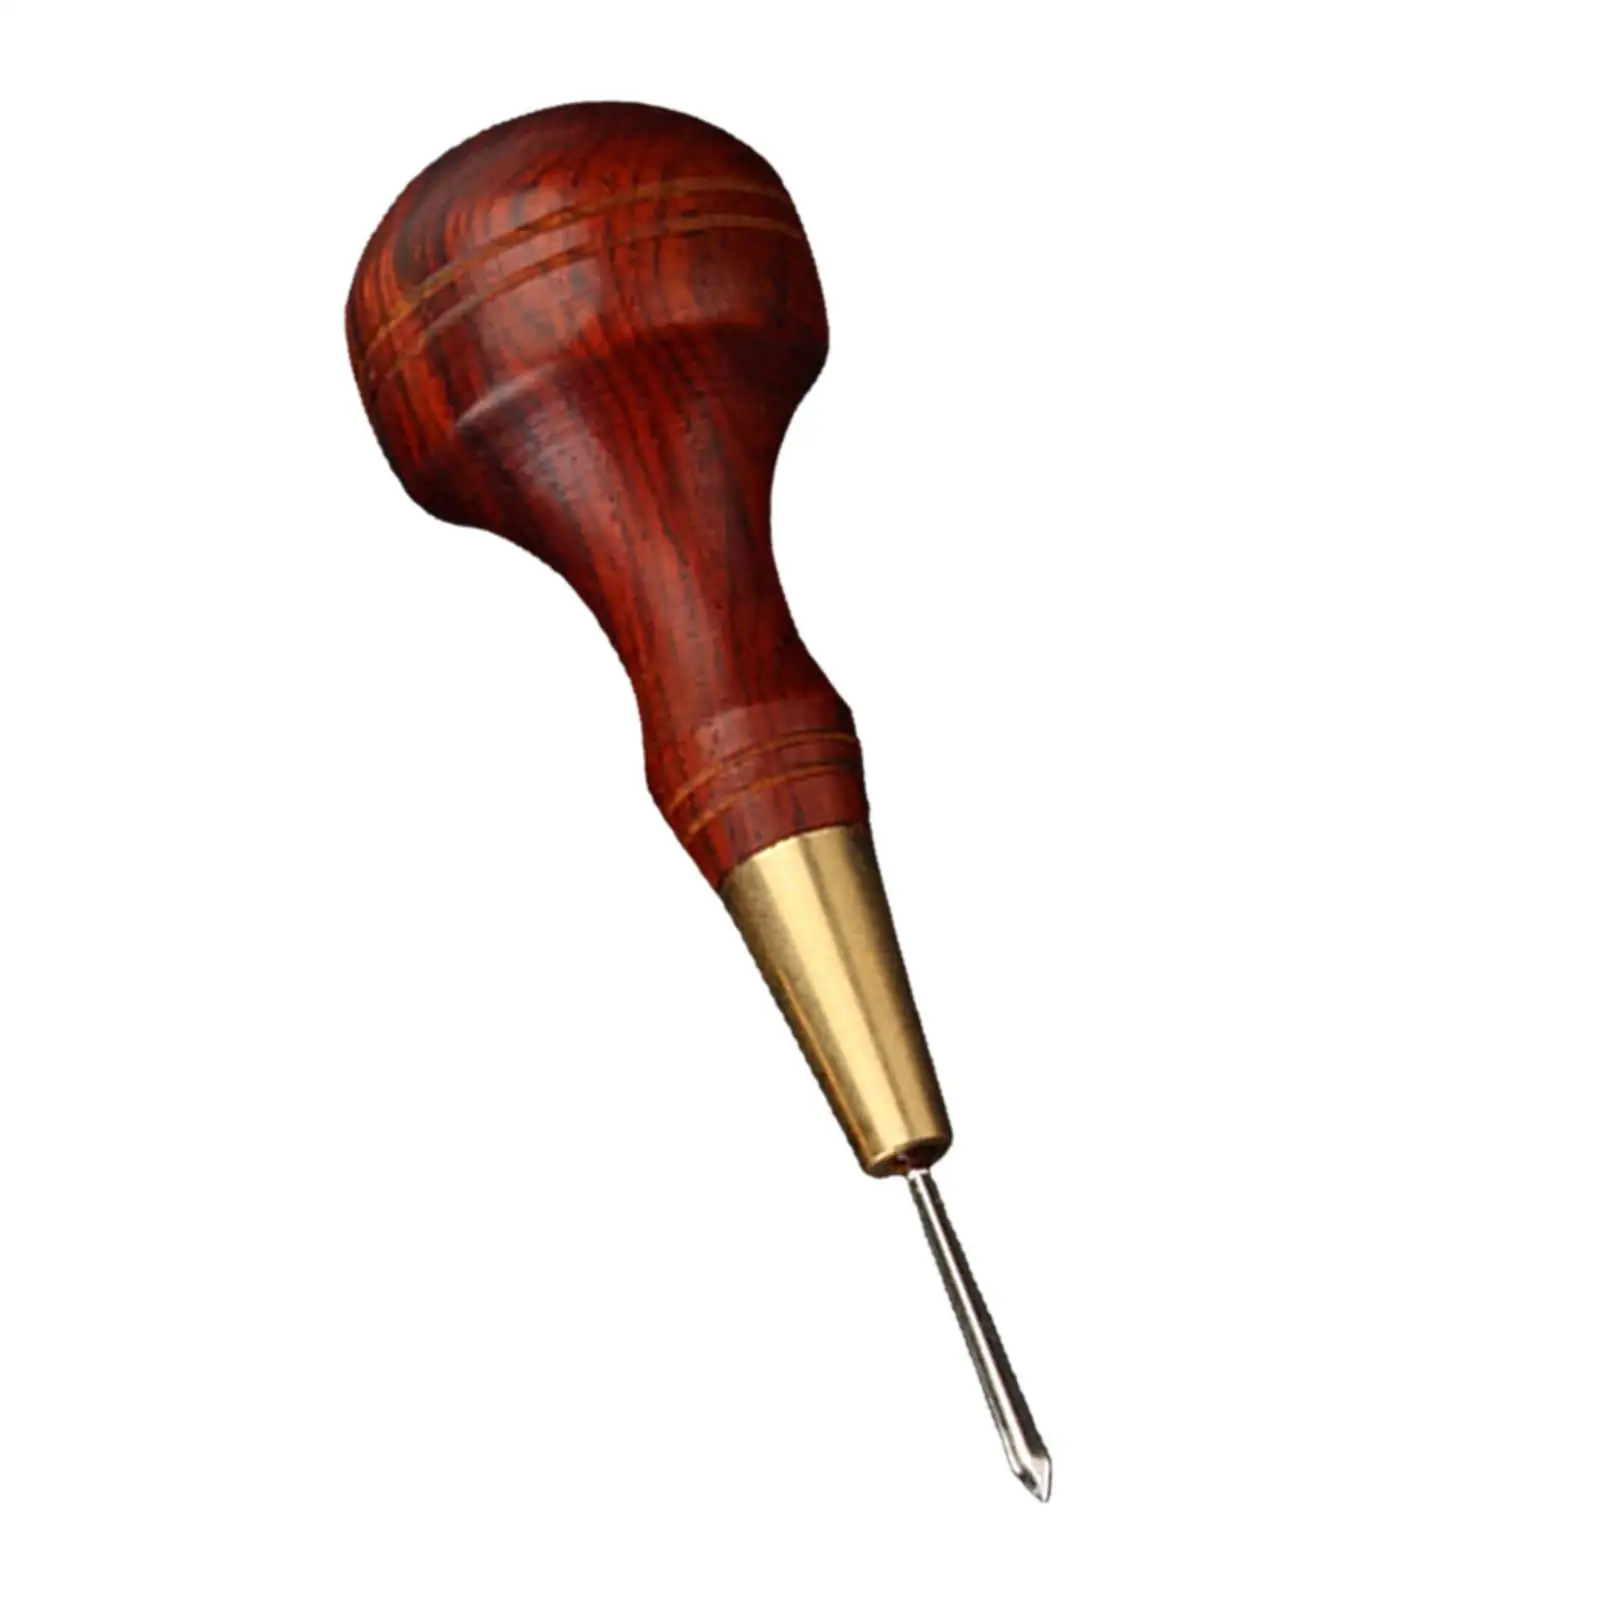 Awl Tool Hand Stitching Leather Craft Sewing Gourd Shape Scratch Awl for DIY Handmade Pin Punching Leather Punch Hole